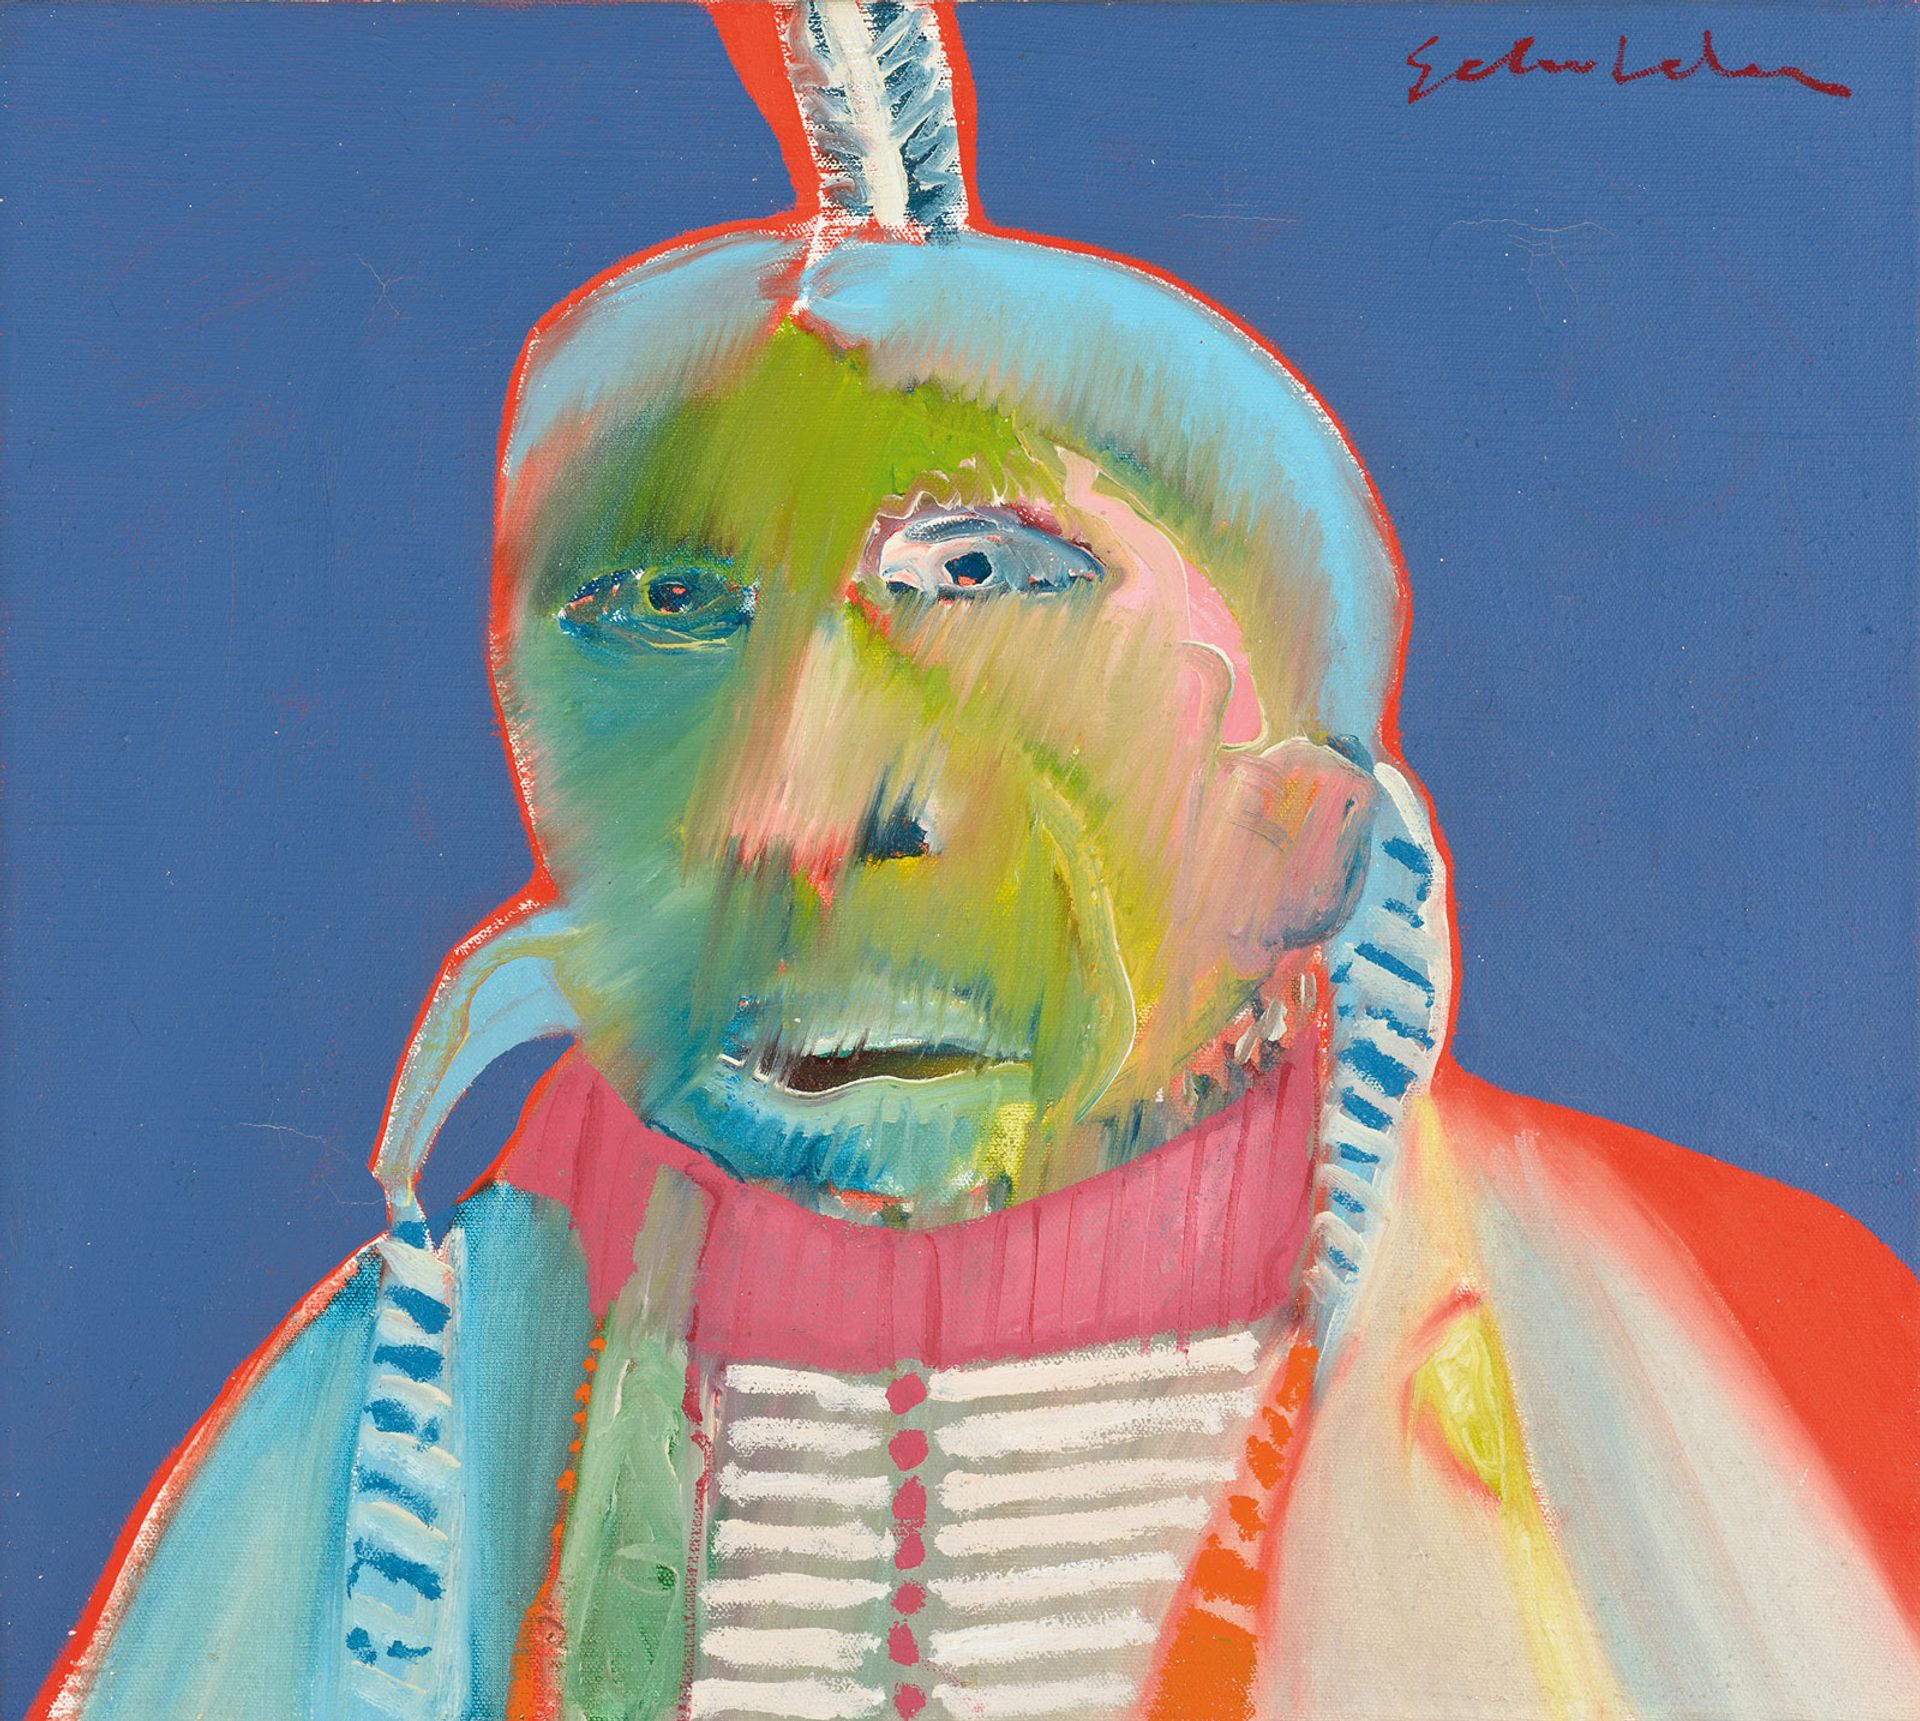 Fritz Scholder's Monster Indian (1968) courtesy of the Crystal Bridges Museum of American Art